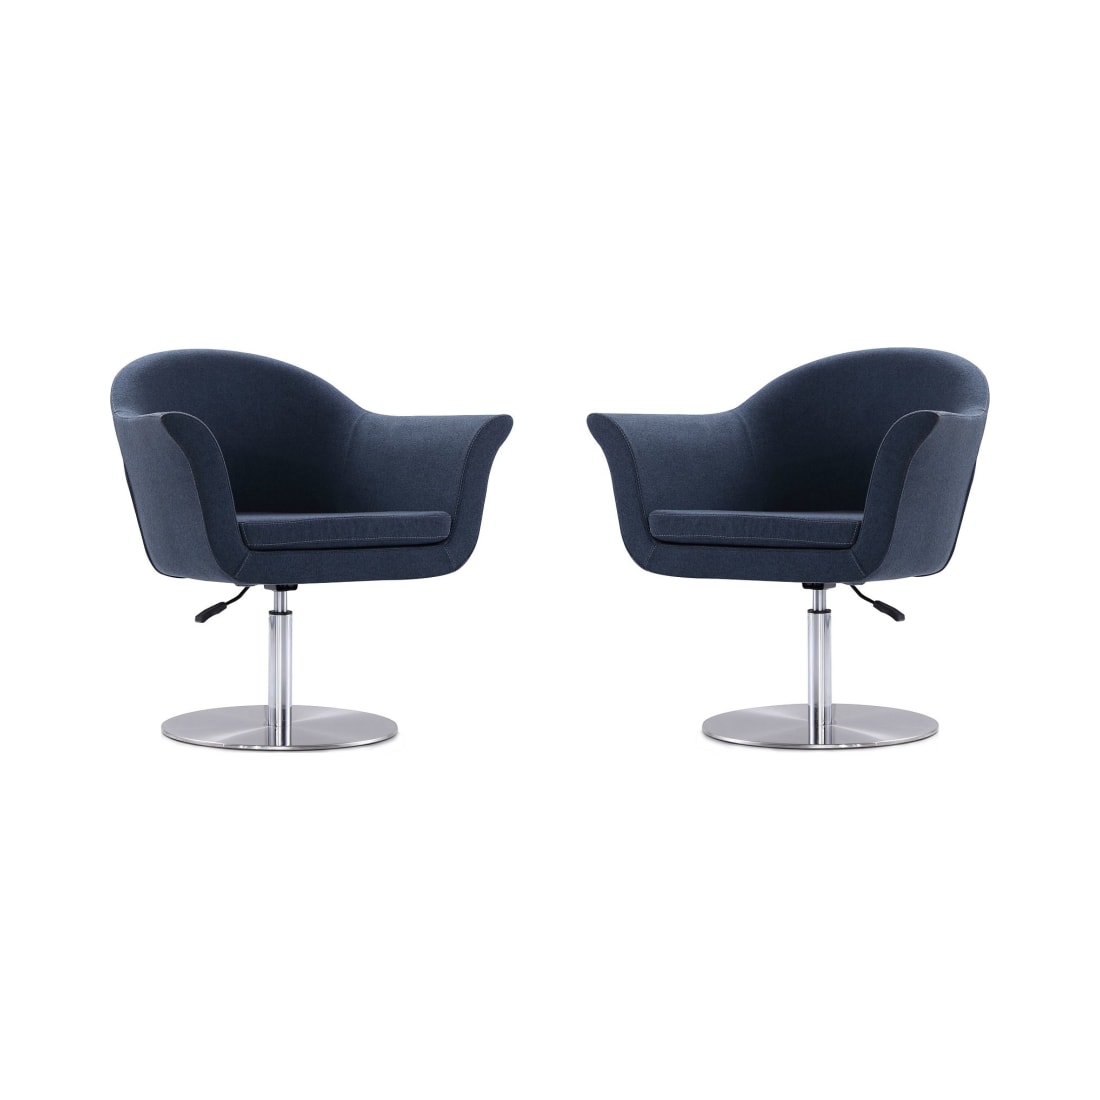 Voyager Swivel Adjustable Accent Chair in Smokey Blue and Brushed Metal (Set of 2)